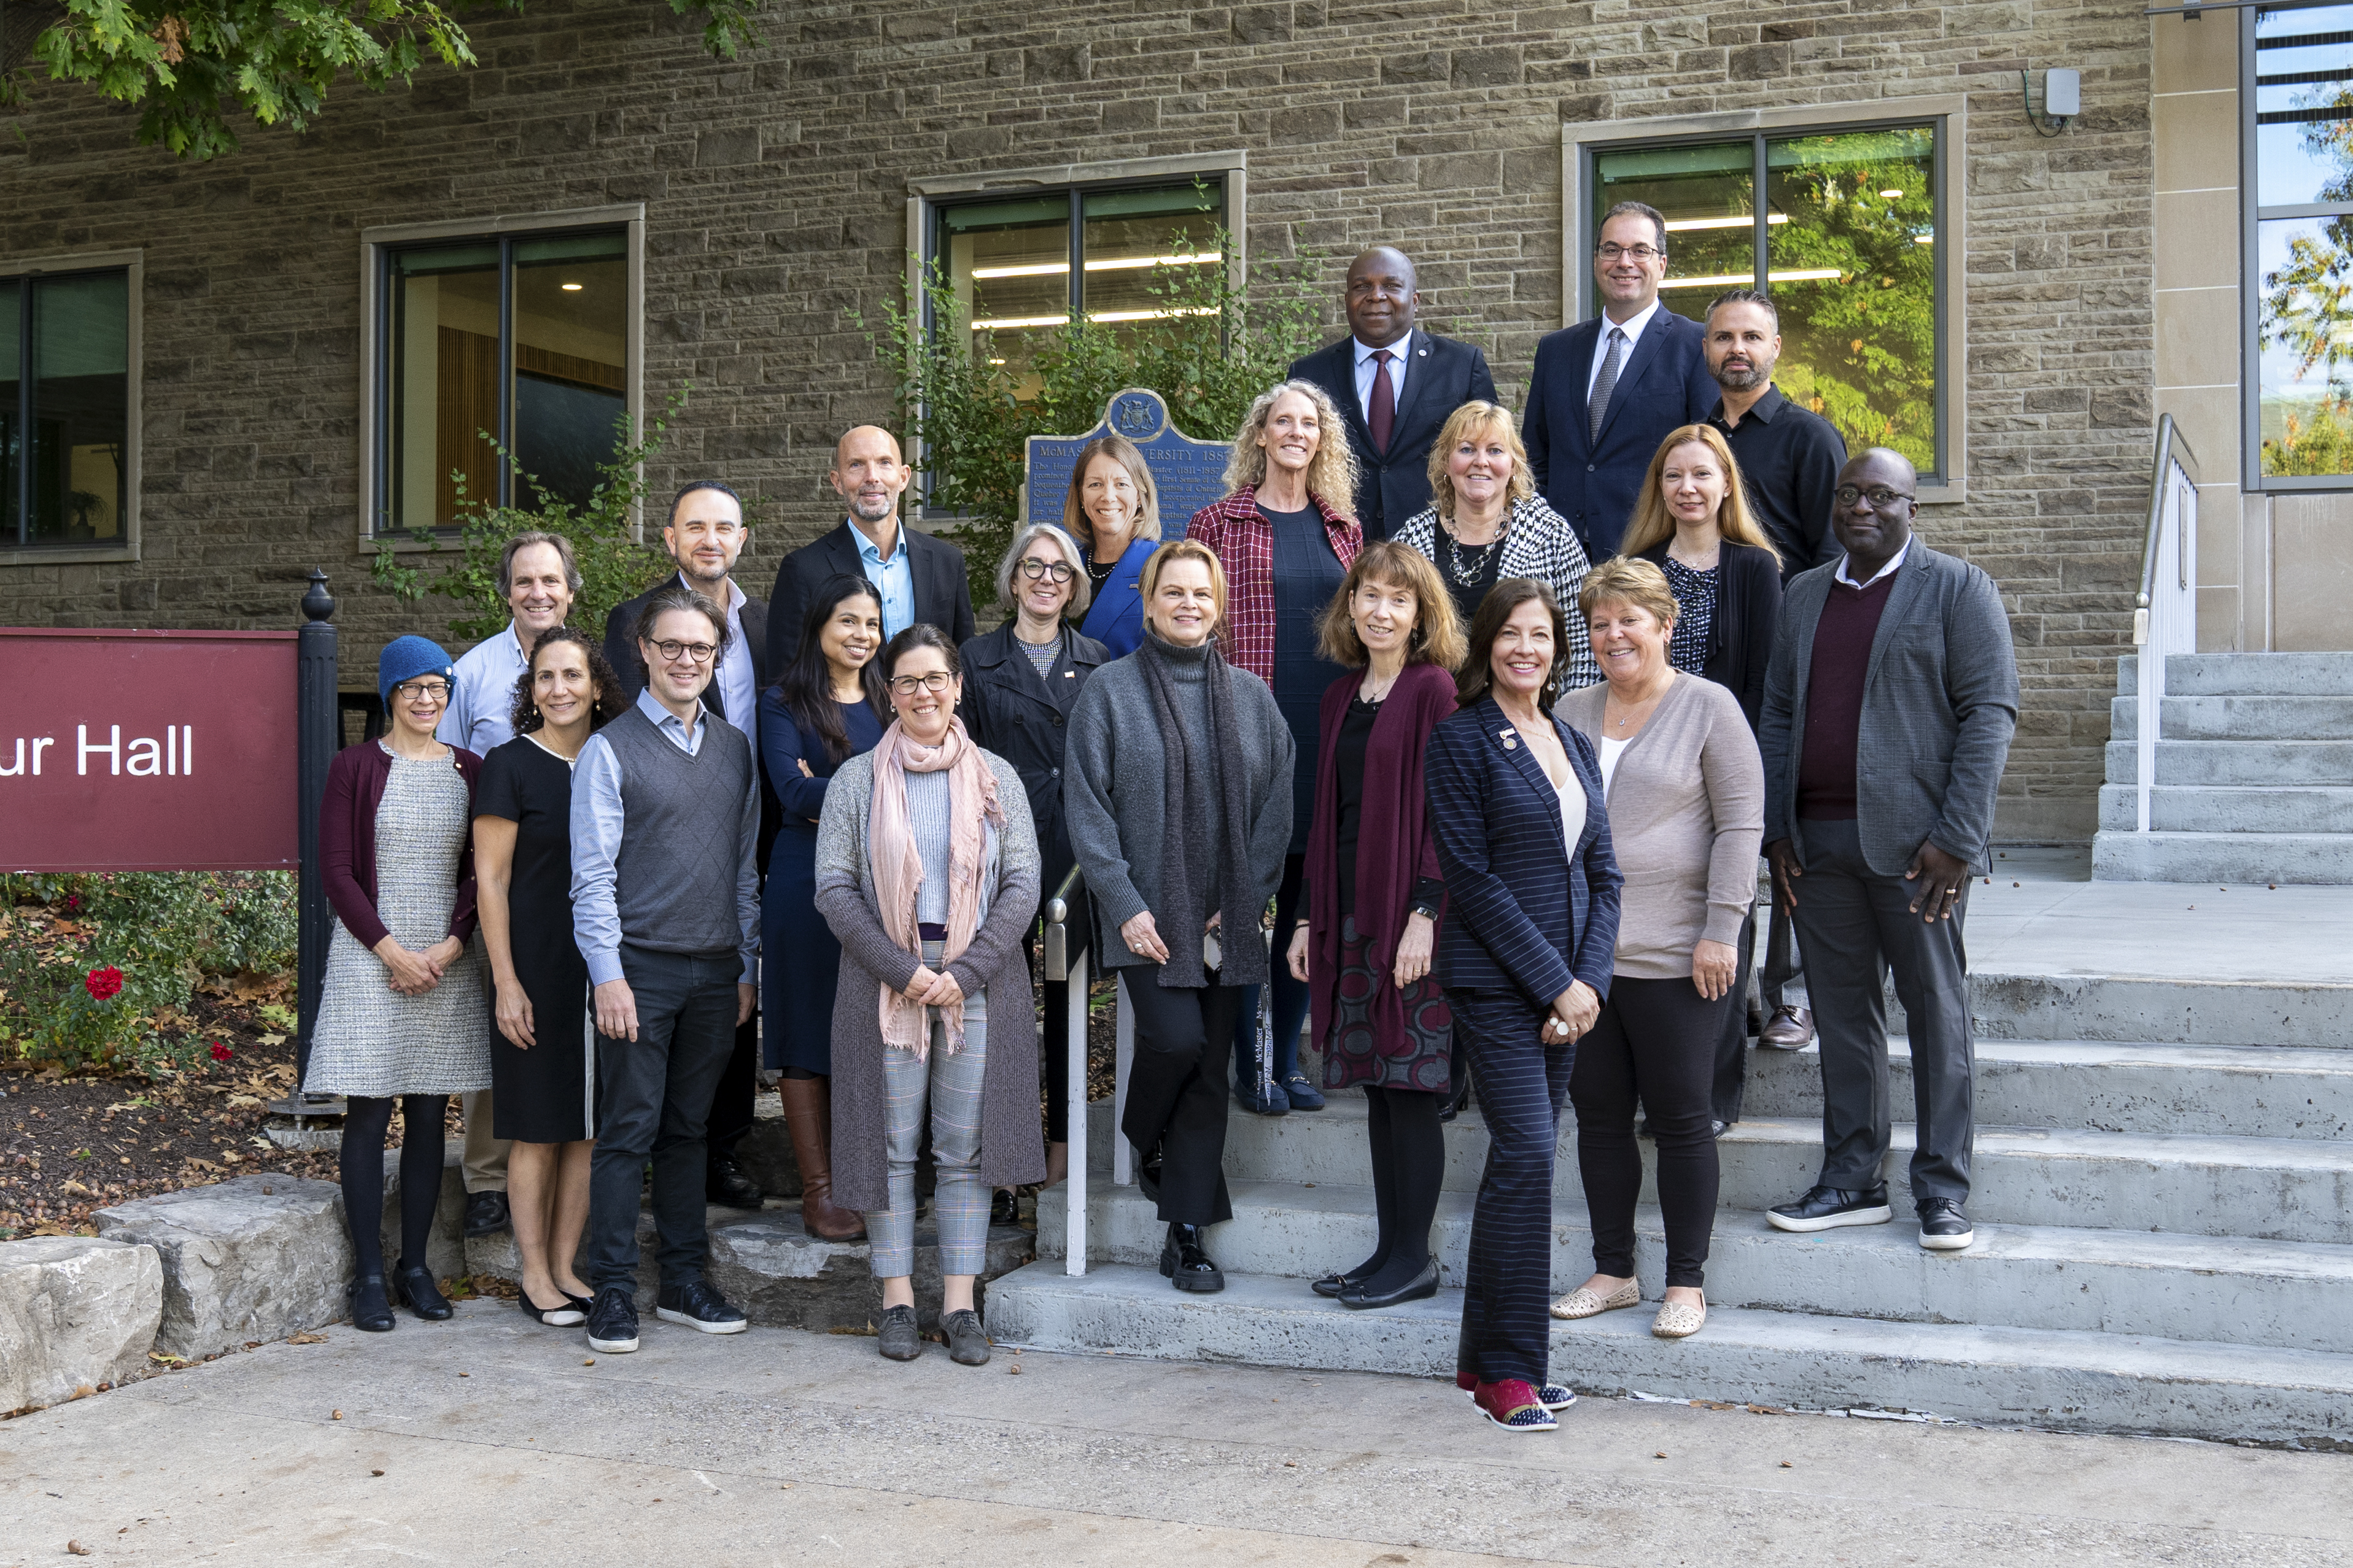 Group photo of McMaster's Provost Council members